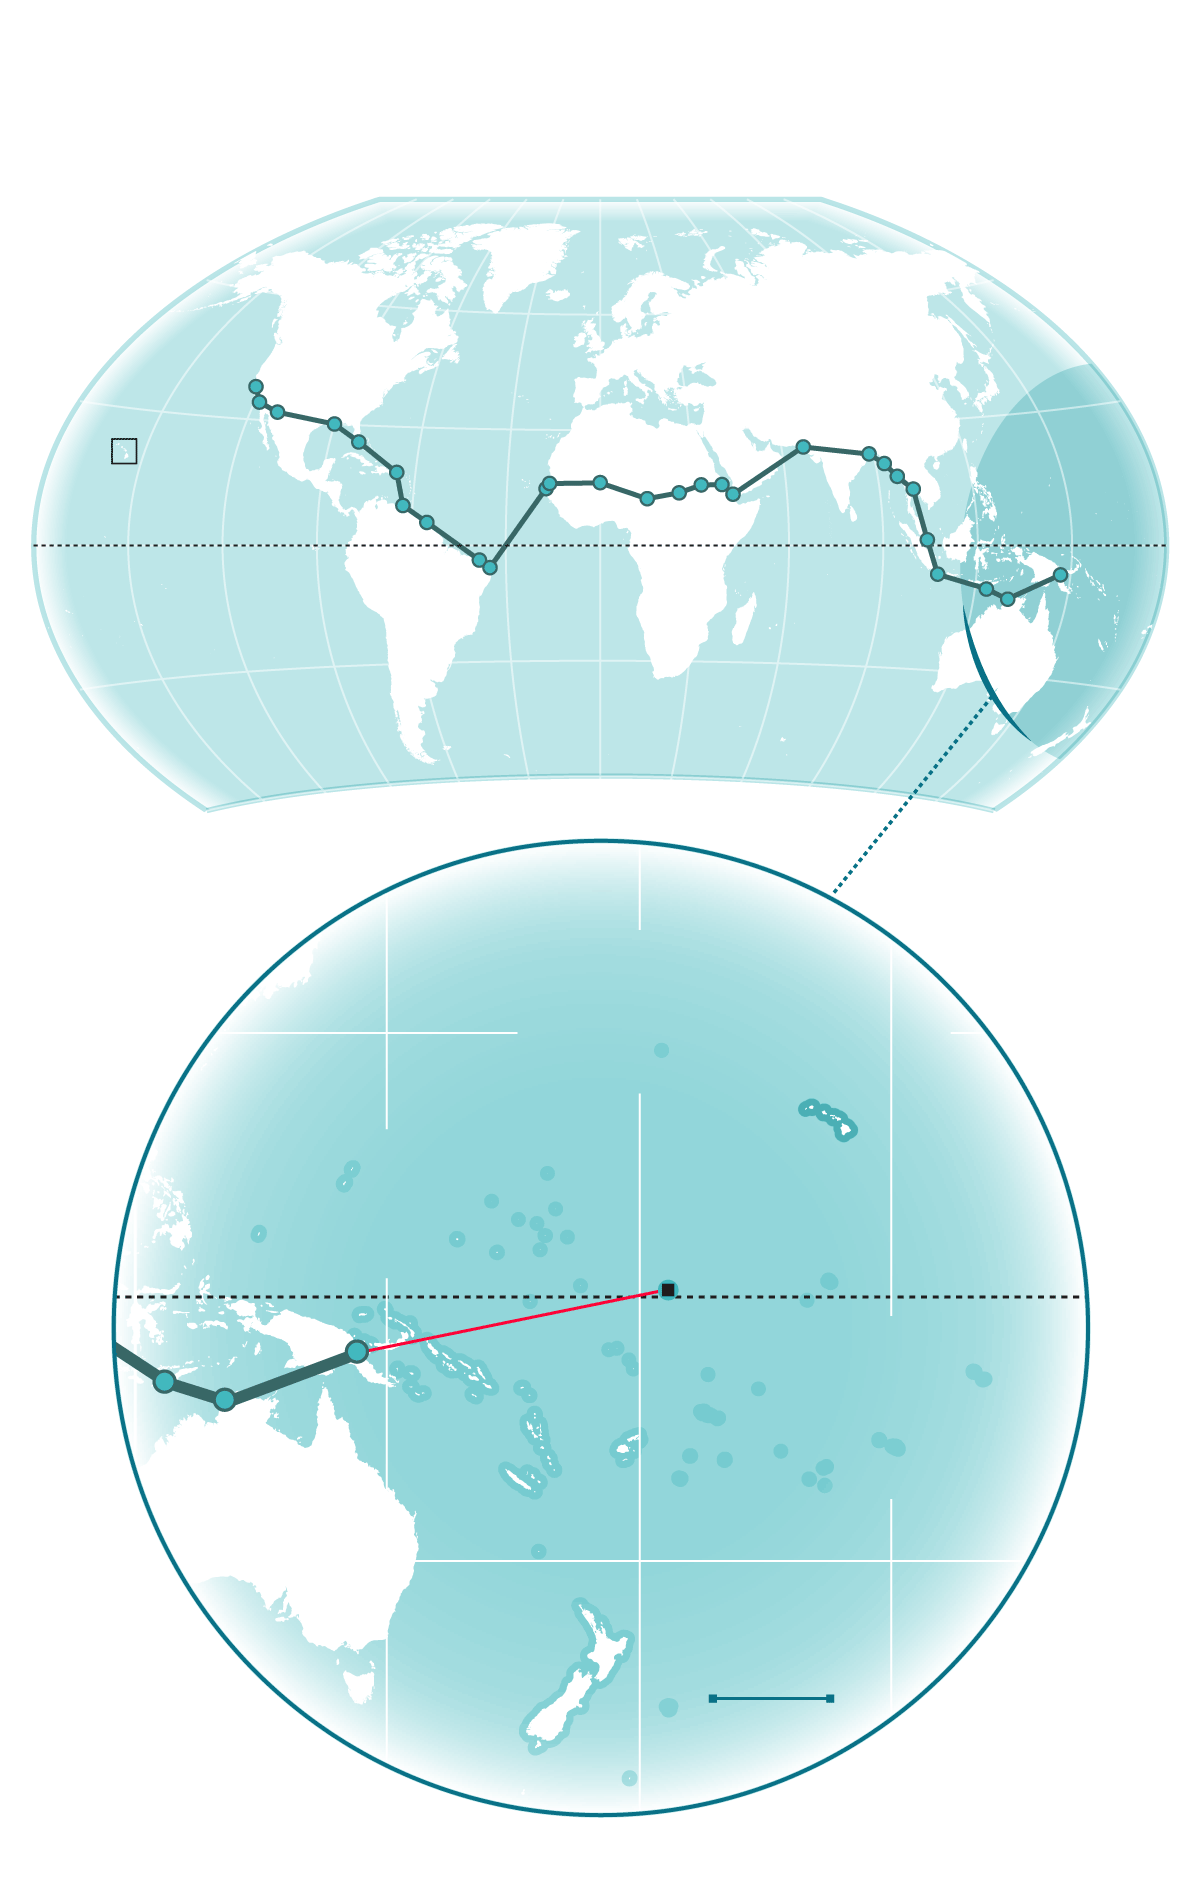 Map showing Amelia Earhart’s last world-tour flight path from Oakland California through Papau New Guinea in 1937.